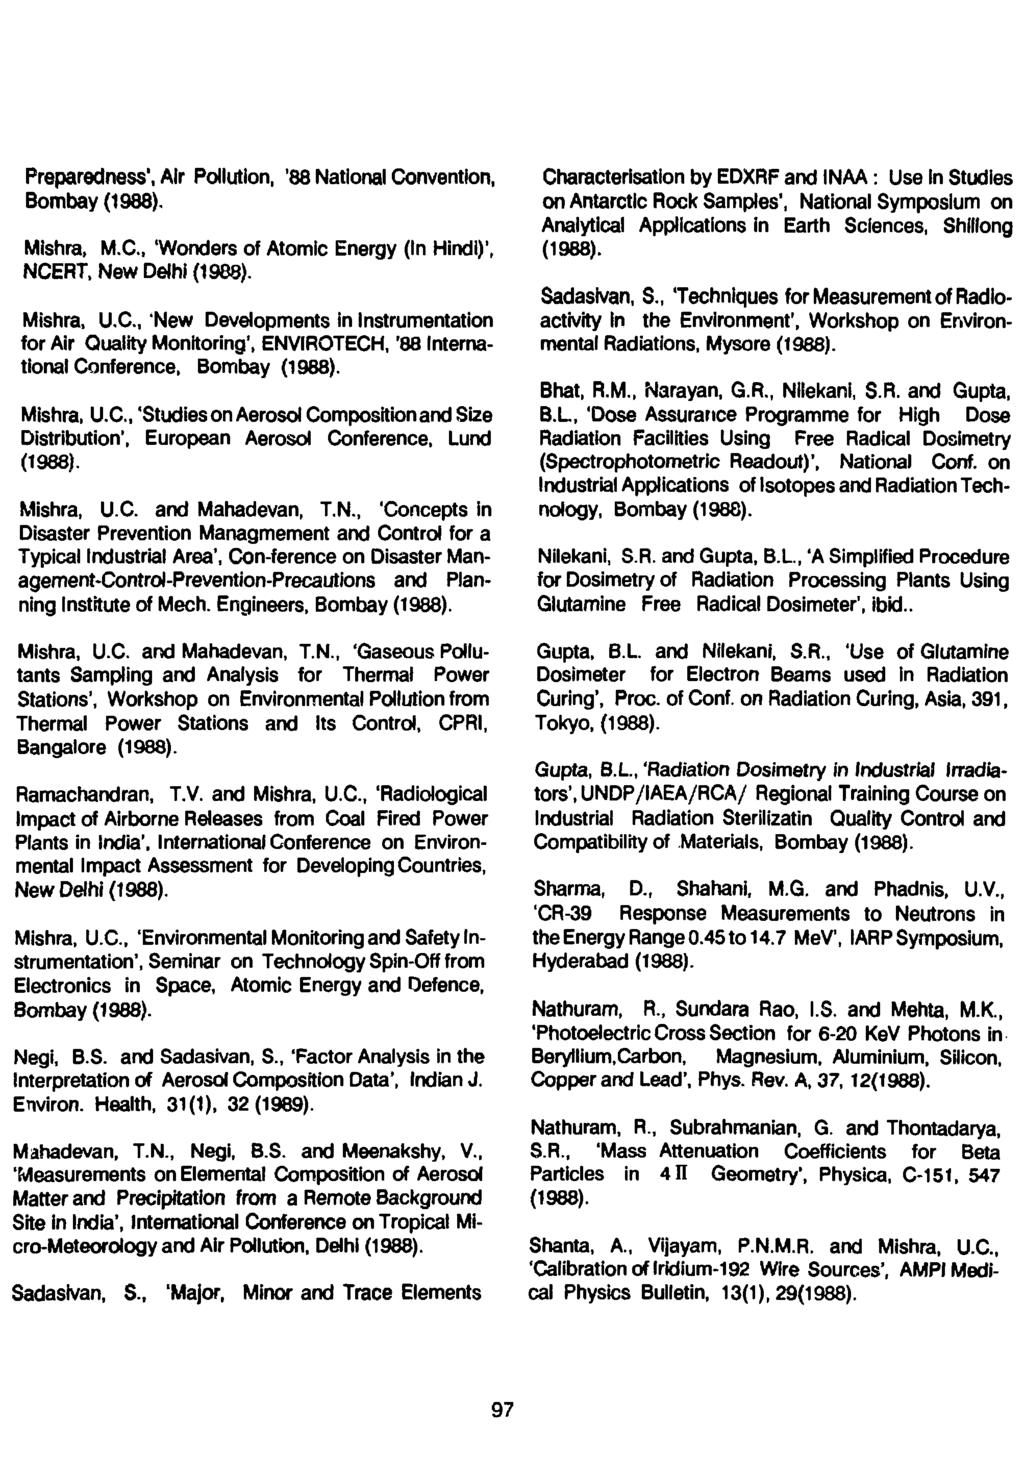 Preparedness', Air Pollution, '88 National Convention, Bombay Mishra, M.C., 'Wonders of Atomic Energy (In Hindi)', NCERT. New Delhi Mishra, U.C., 'New Developments in Instrumentation for Air Quality Monitoring 1, ENVIROTECH, '88 International Conference, Bombay Mishra, U.